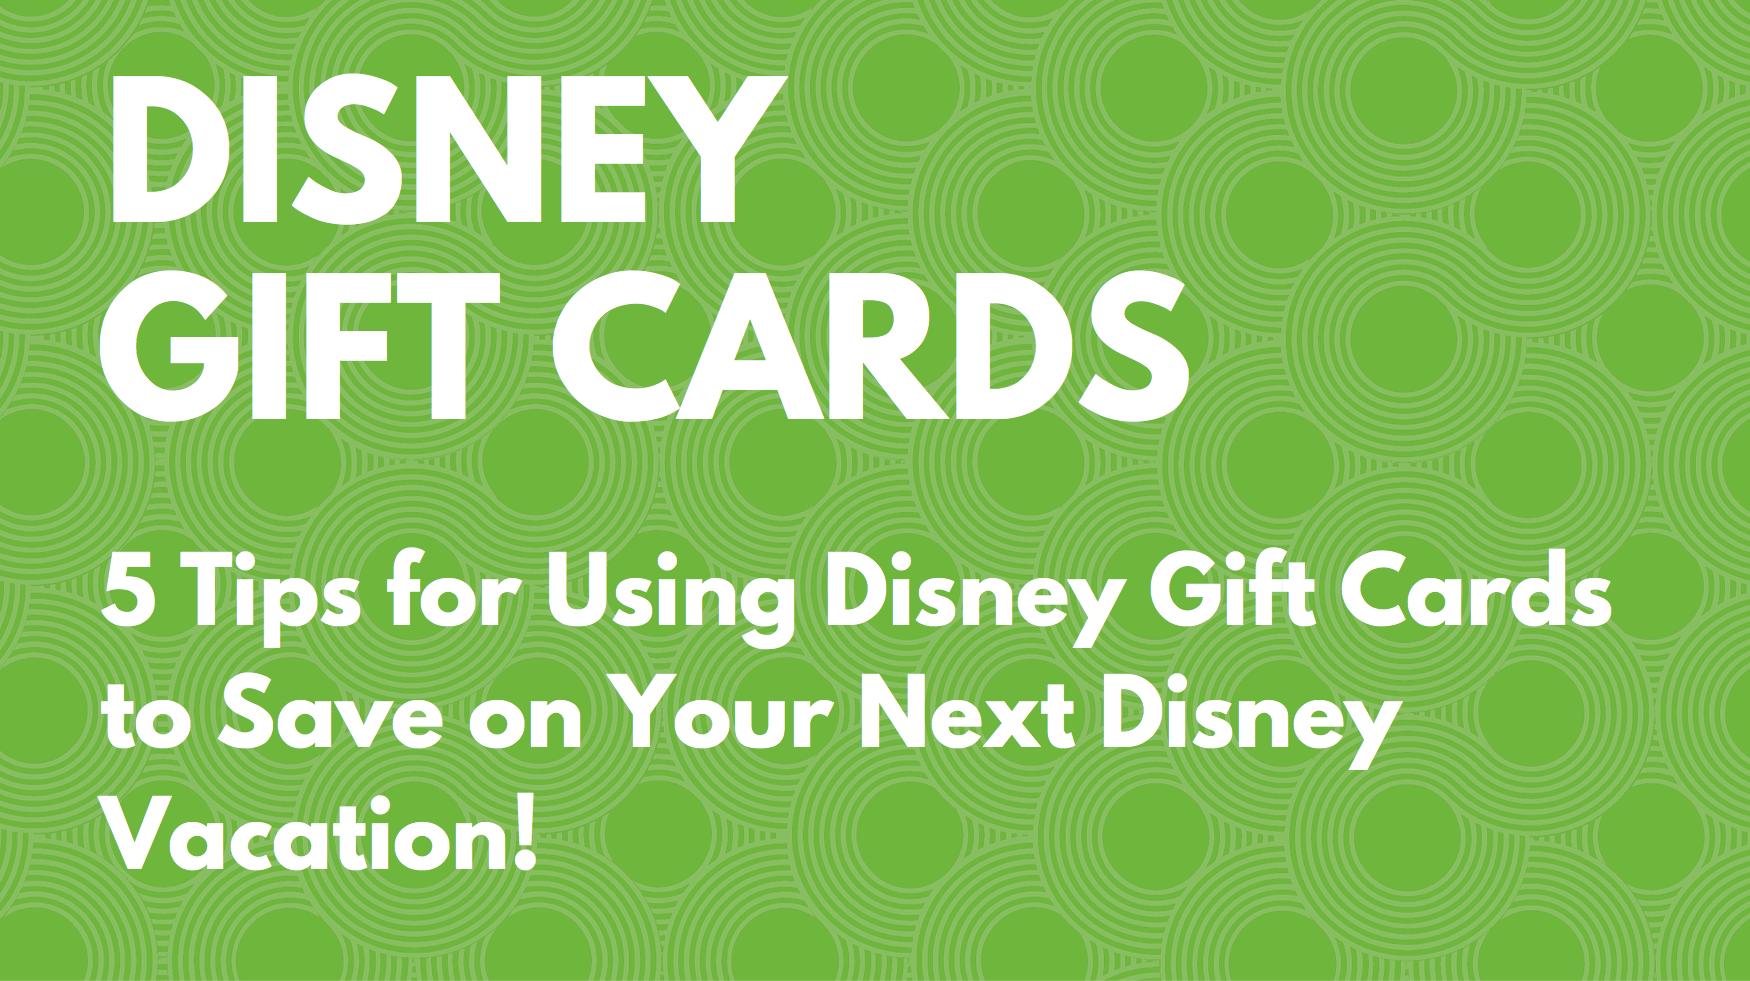 https://magicaltripcations.com/wp-content/uploads/2016/06/DISNEY-GIFT-CARDS.png